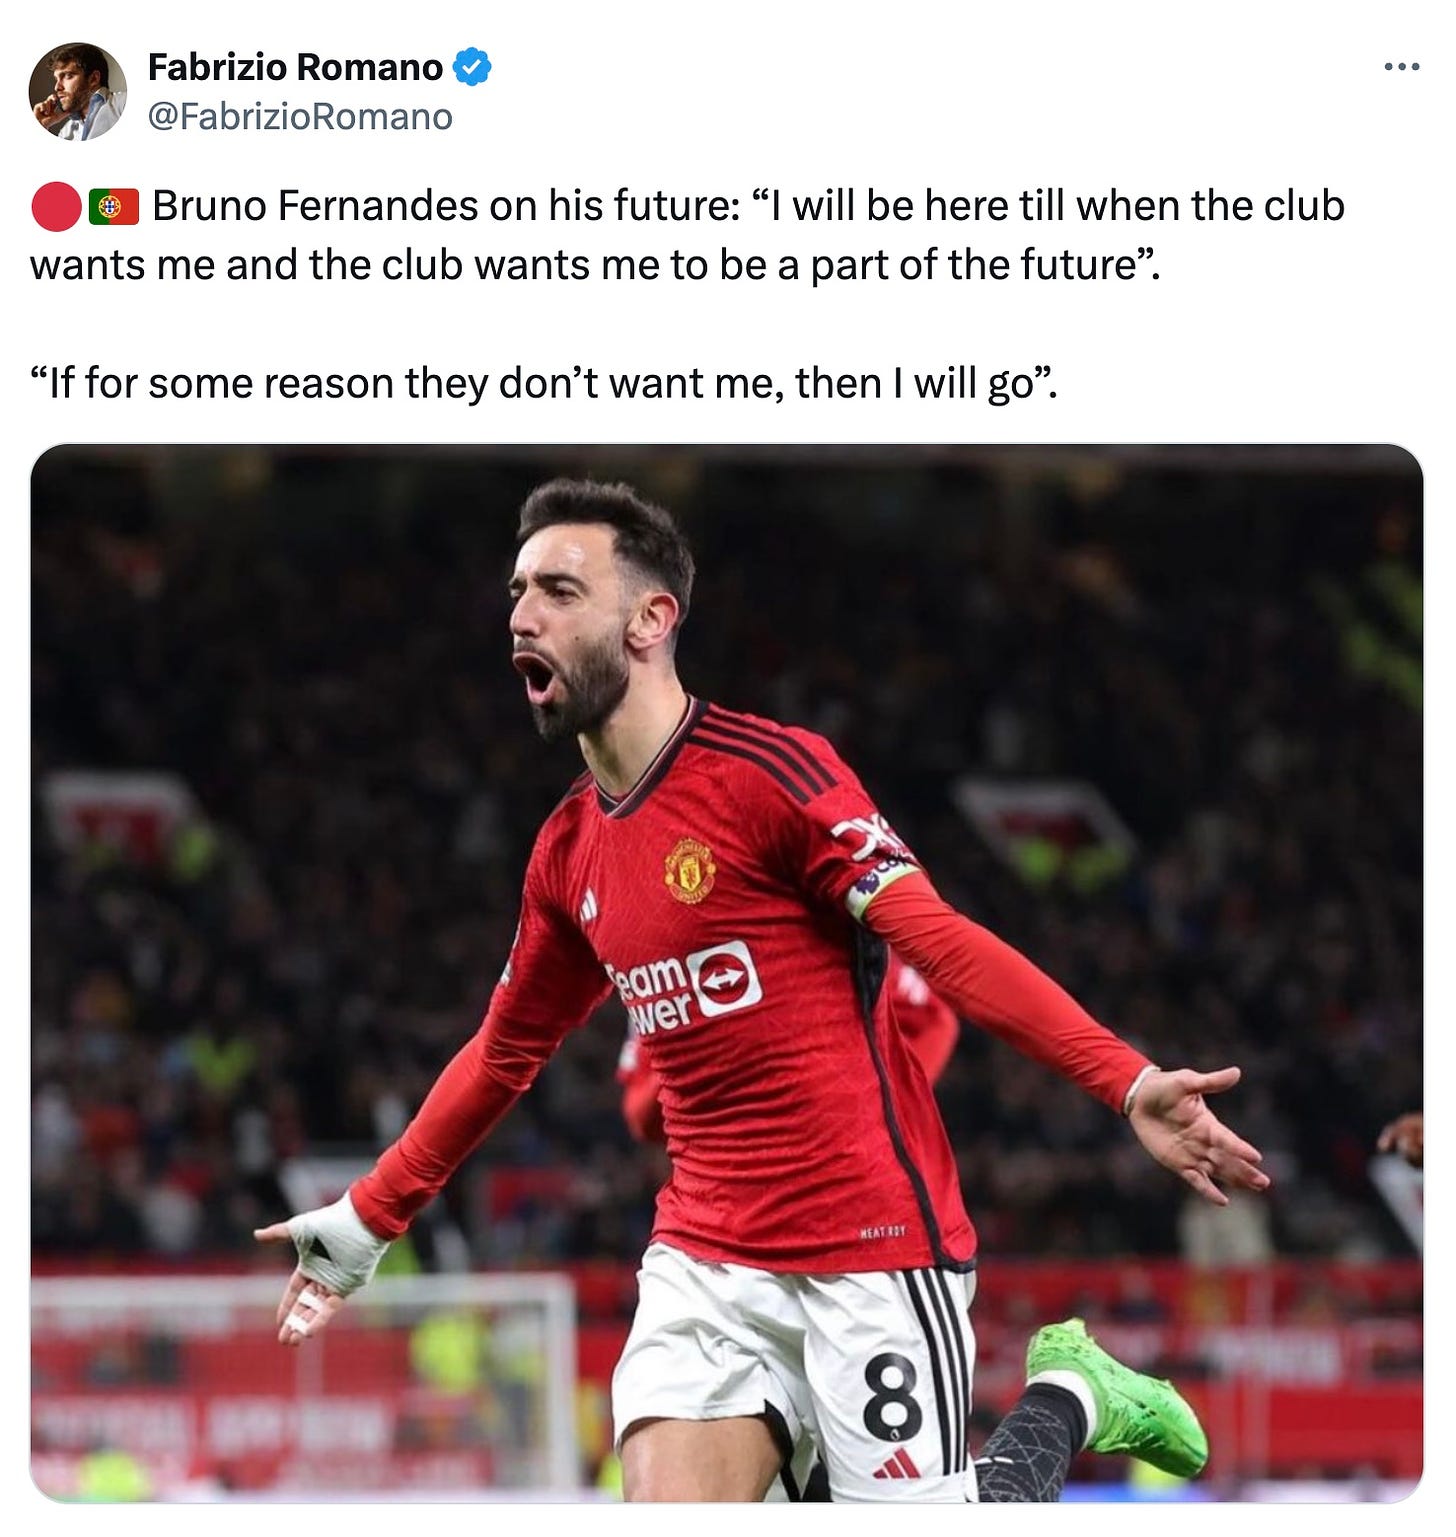 A tweet by Fabrizio Romano featuring a quote from Bruno Fernandes